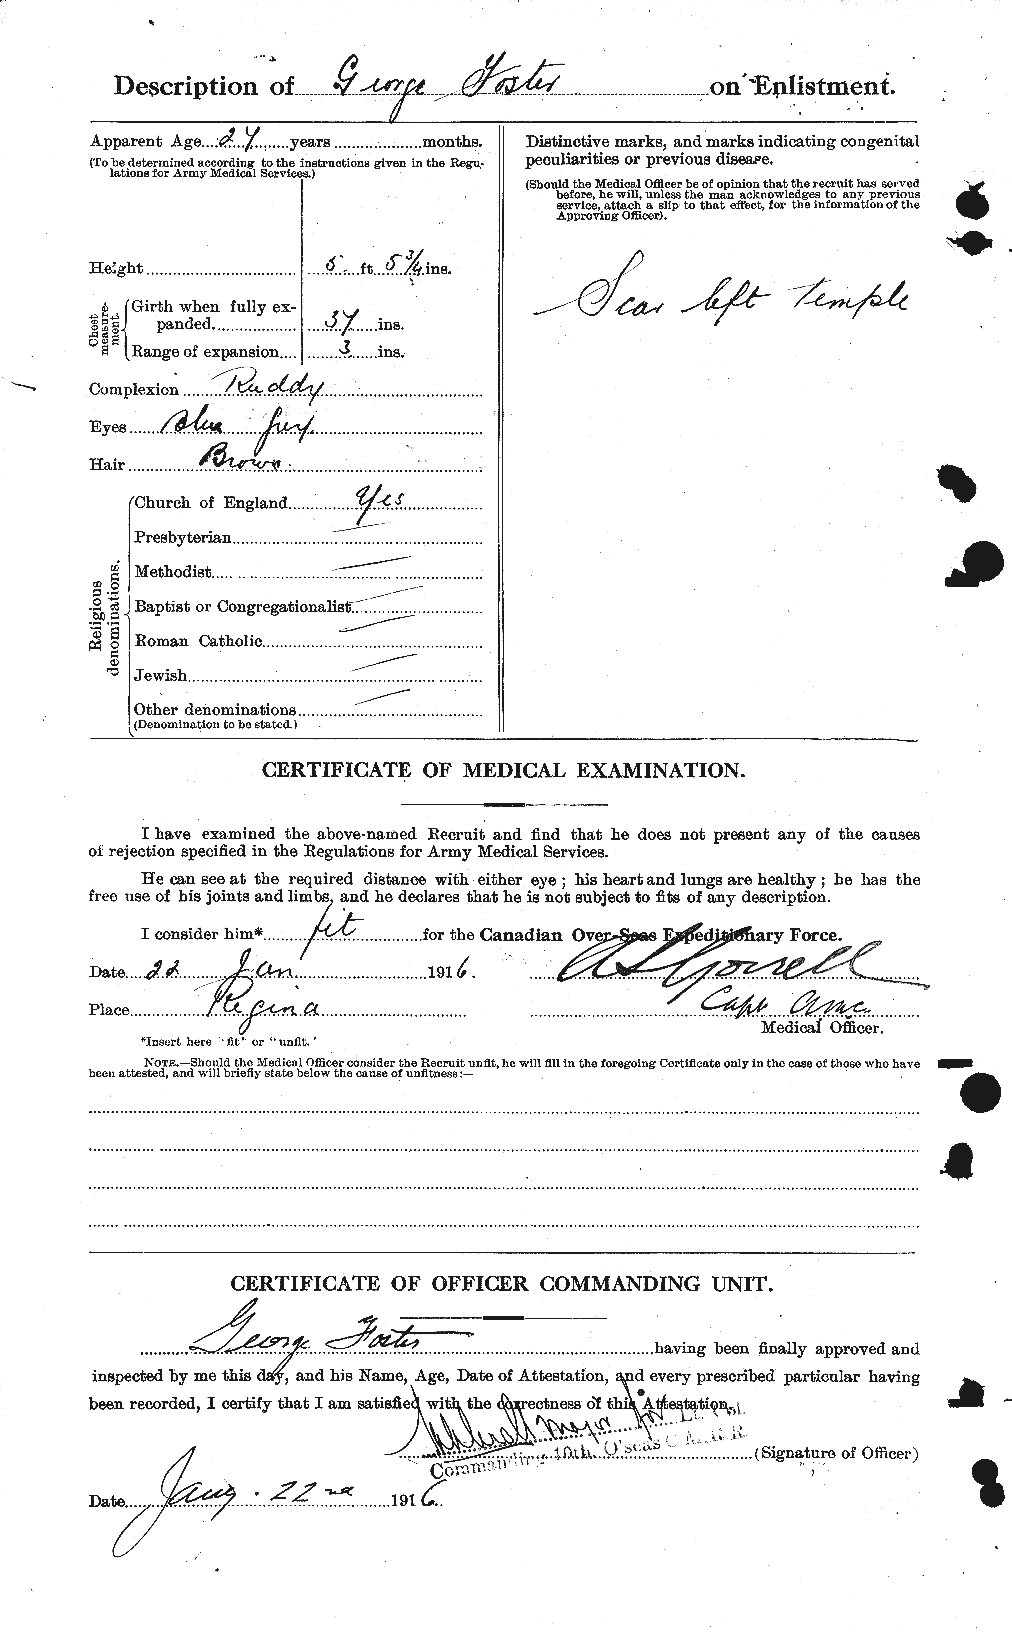 Personnel Records of the First World War - CEF 330665b